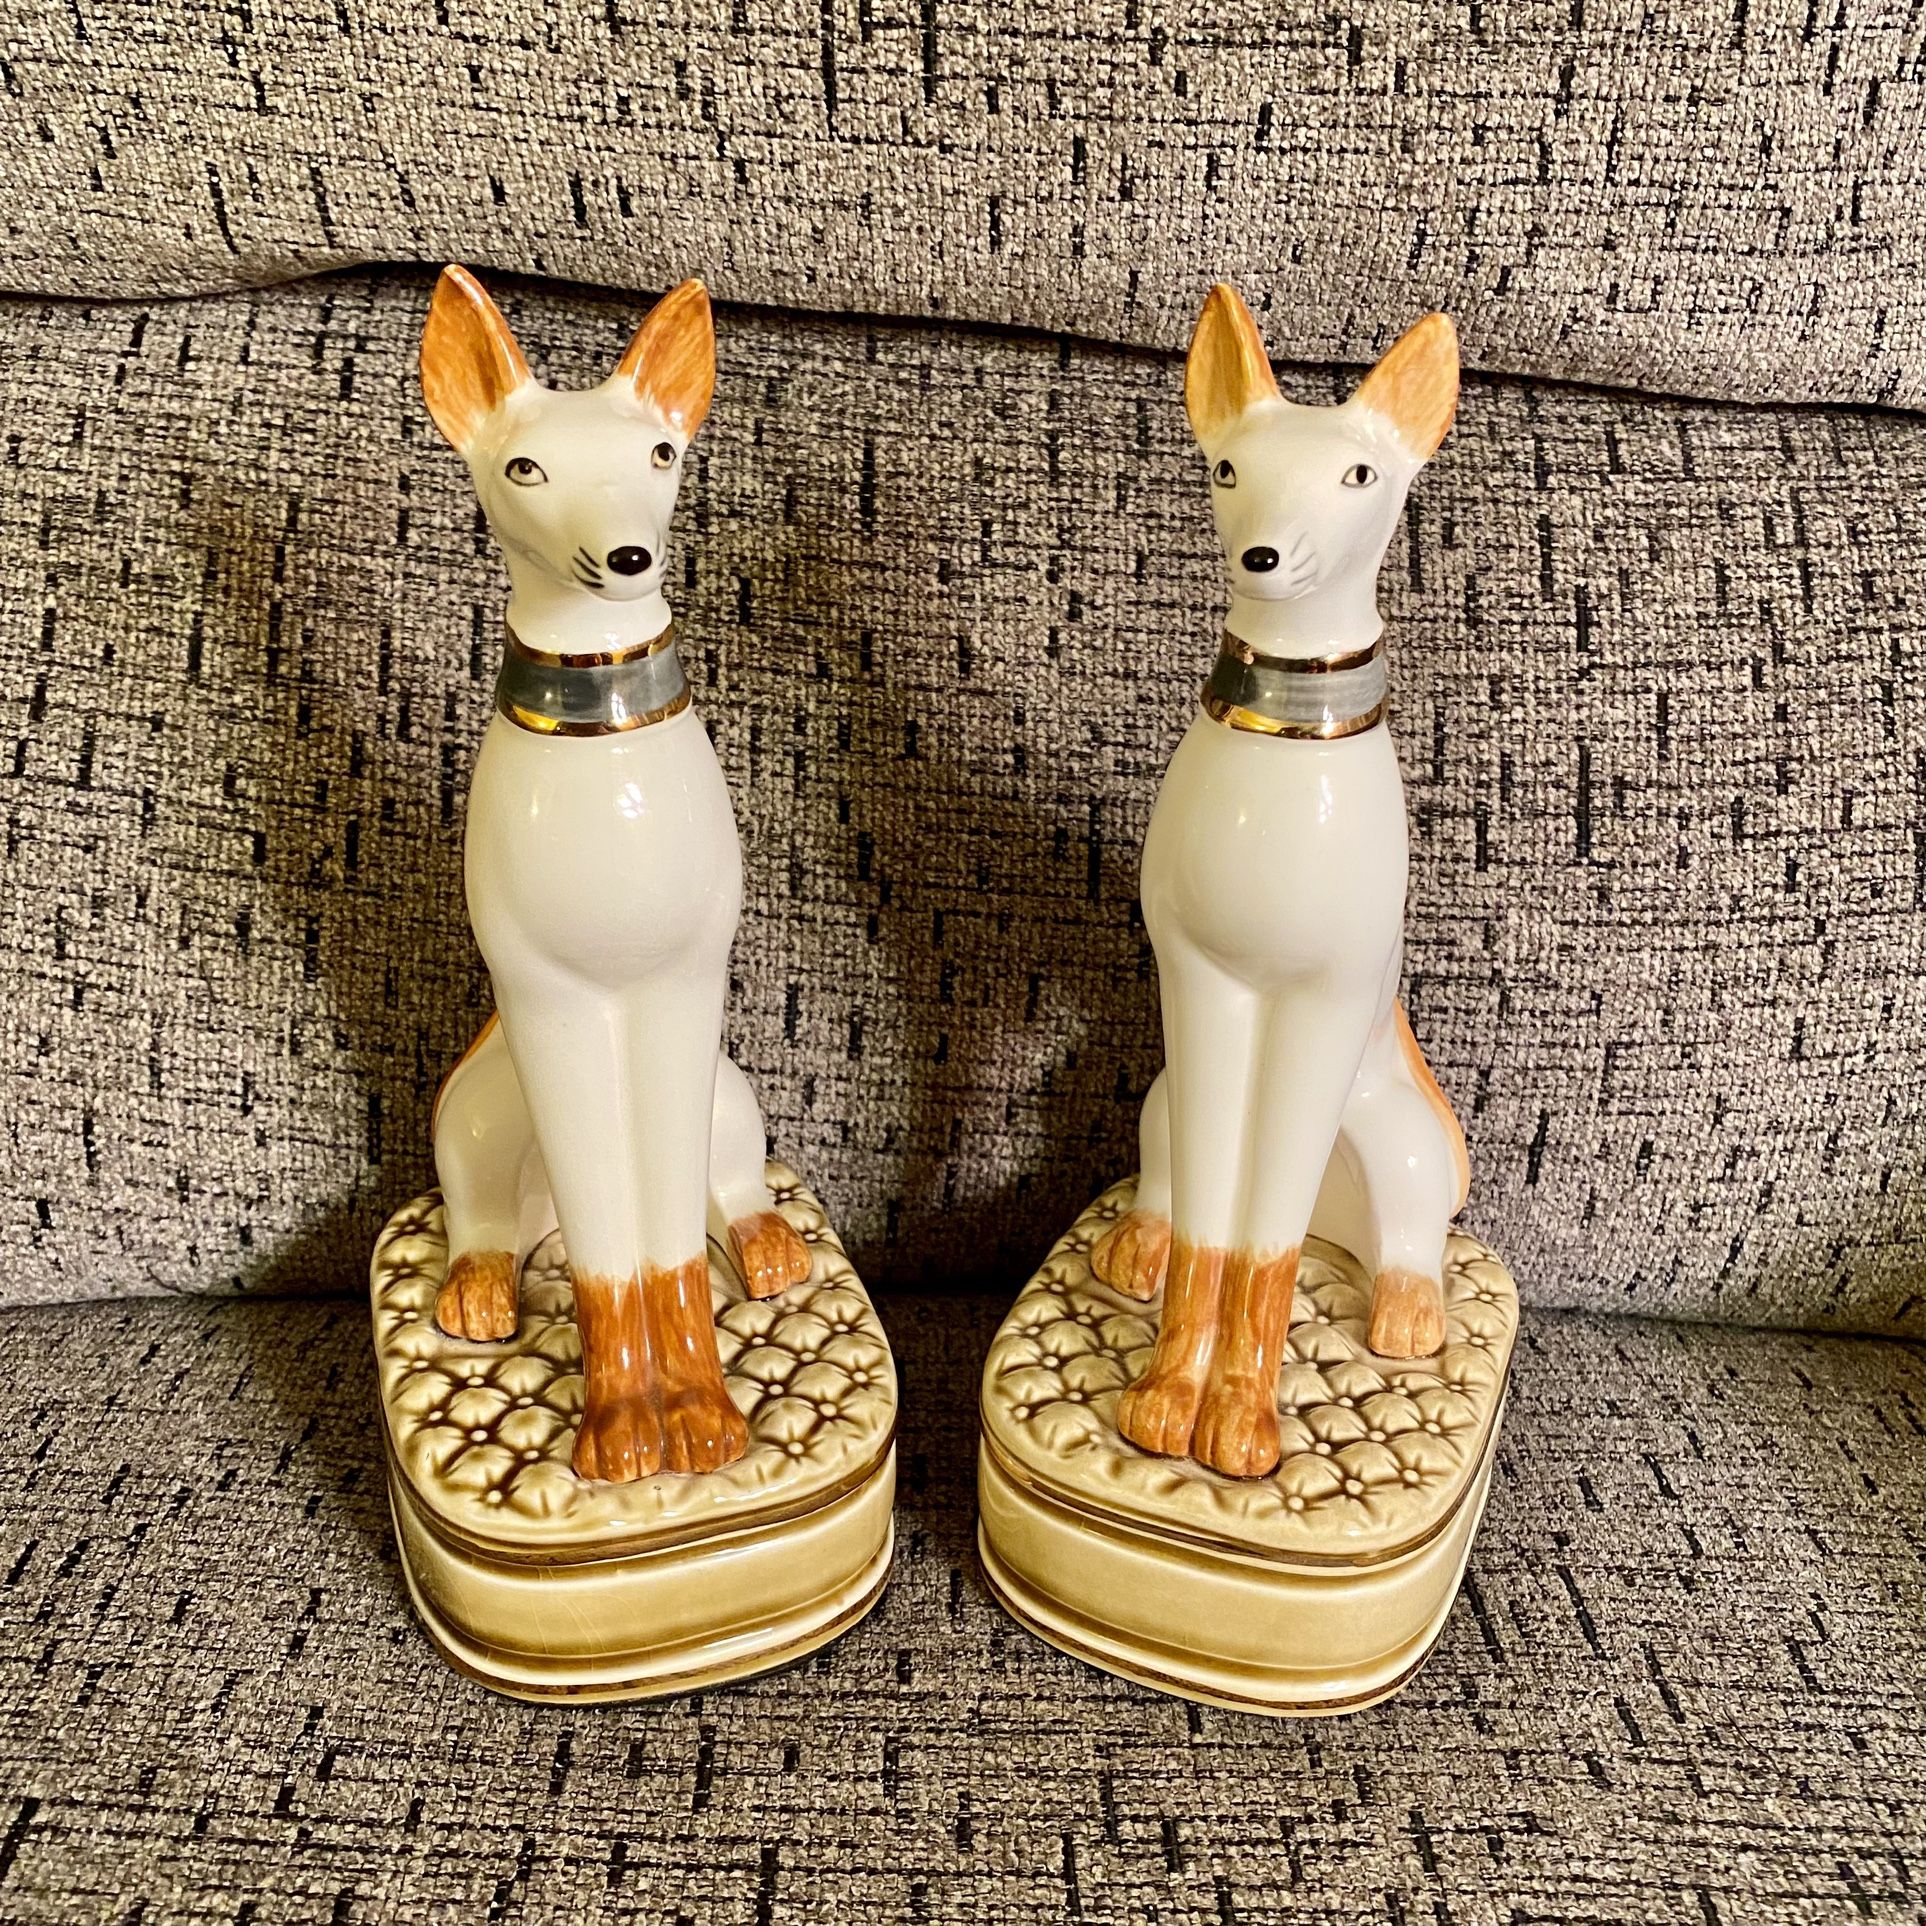 ANDREA By SADEK Whippet Greyhound Dog Bookends Statues Figurines Made in Japan